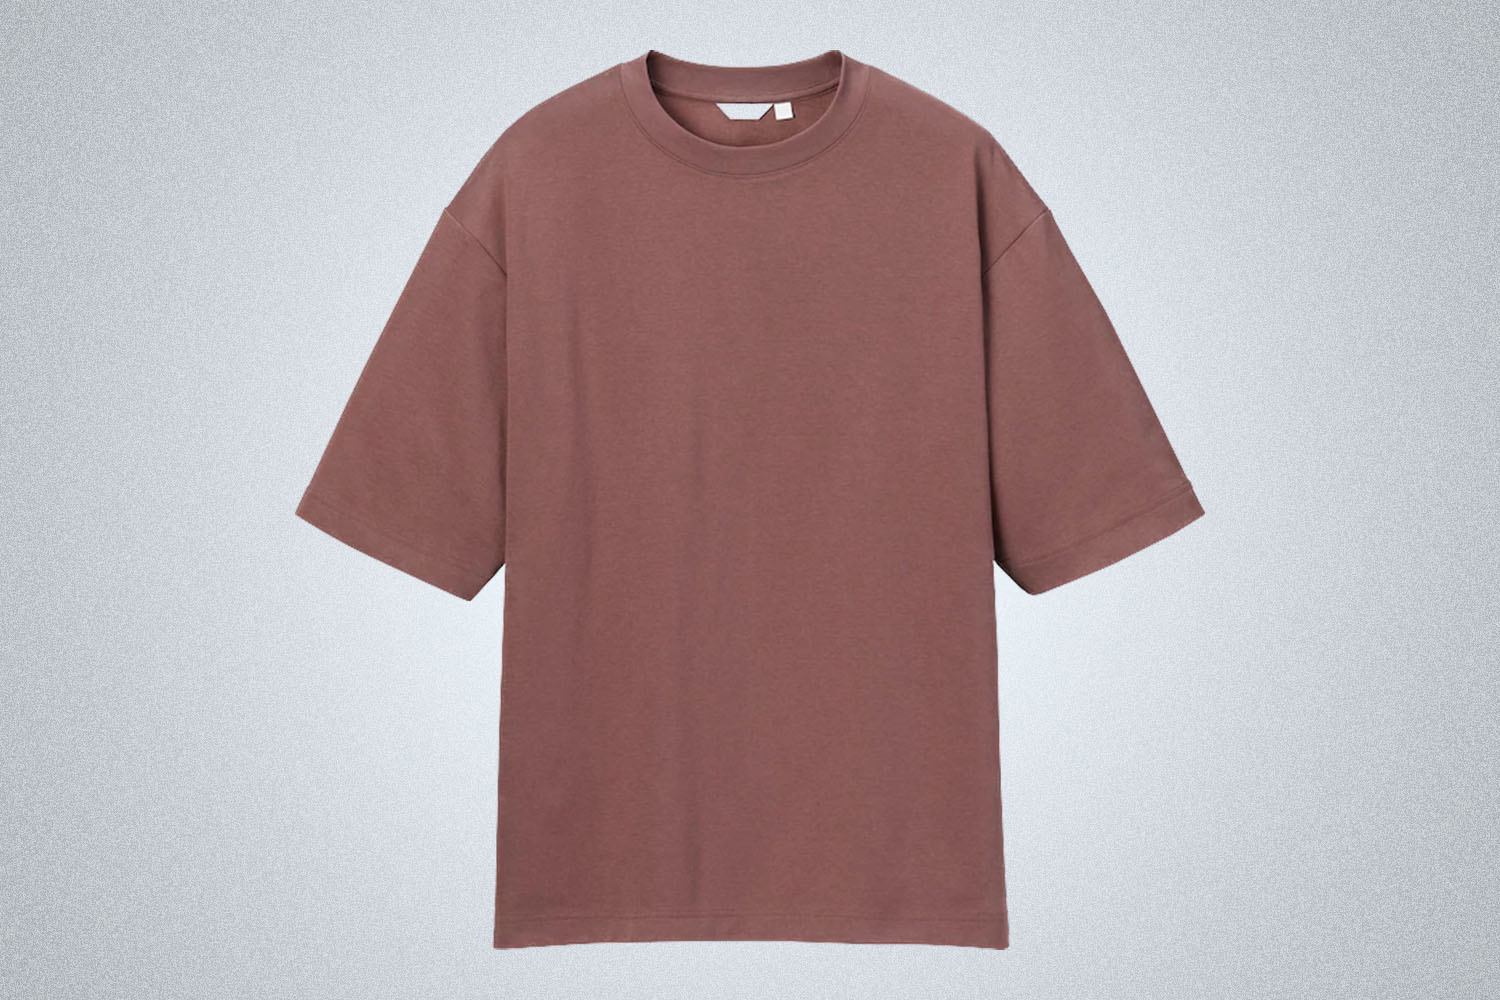 Love our Uniqlo U AIRism Cotton T-Shirt? Then you're sure to love this, UNIQLO TODAY